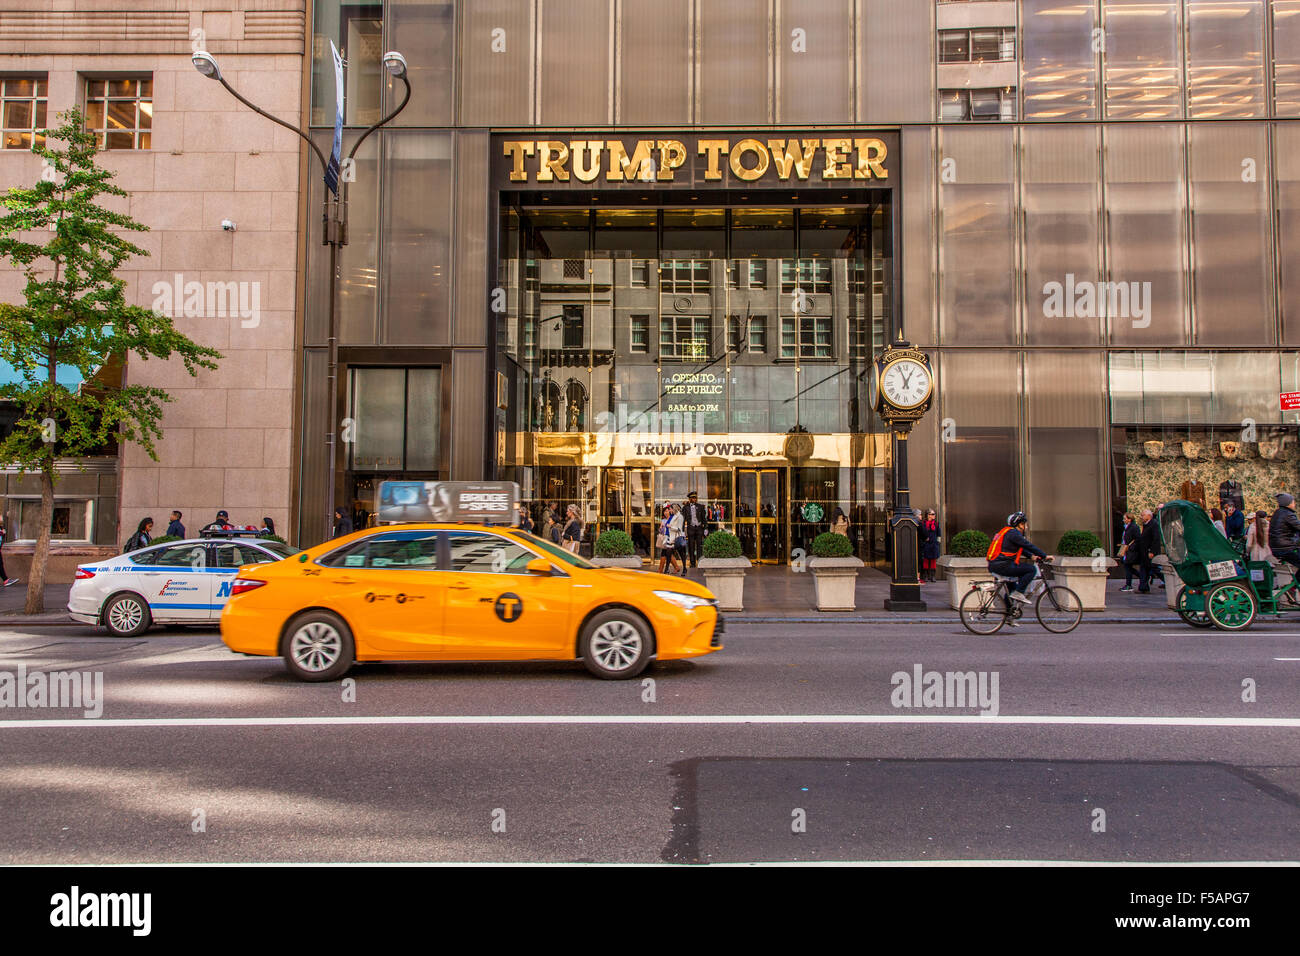 Trump Tower, 5th Avenue, New York City, United States of America. Stock Photo